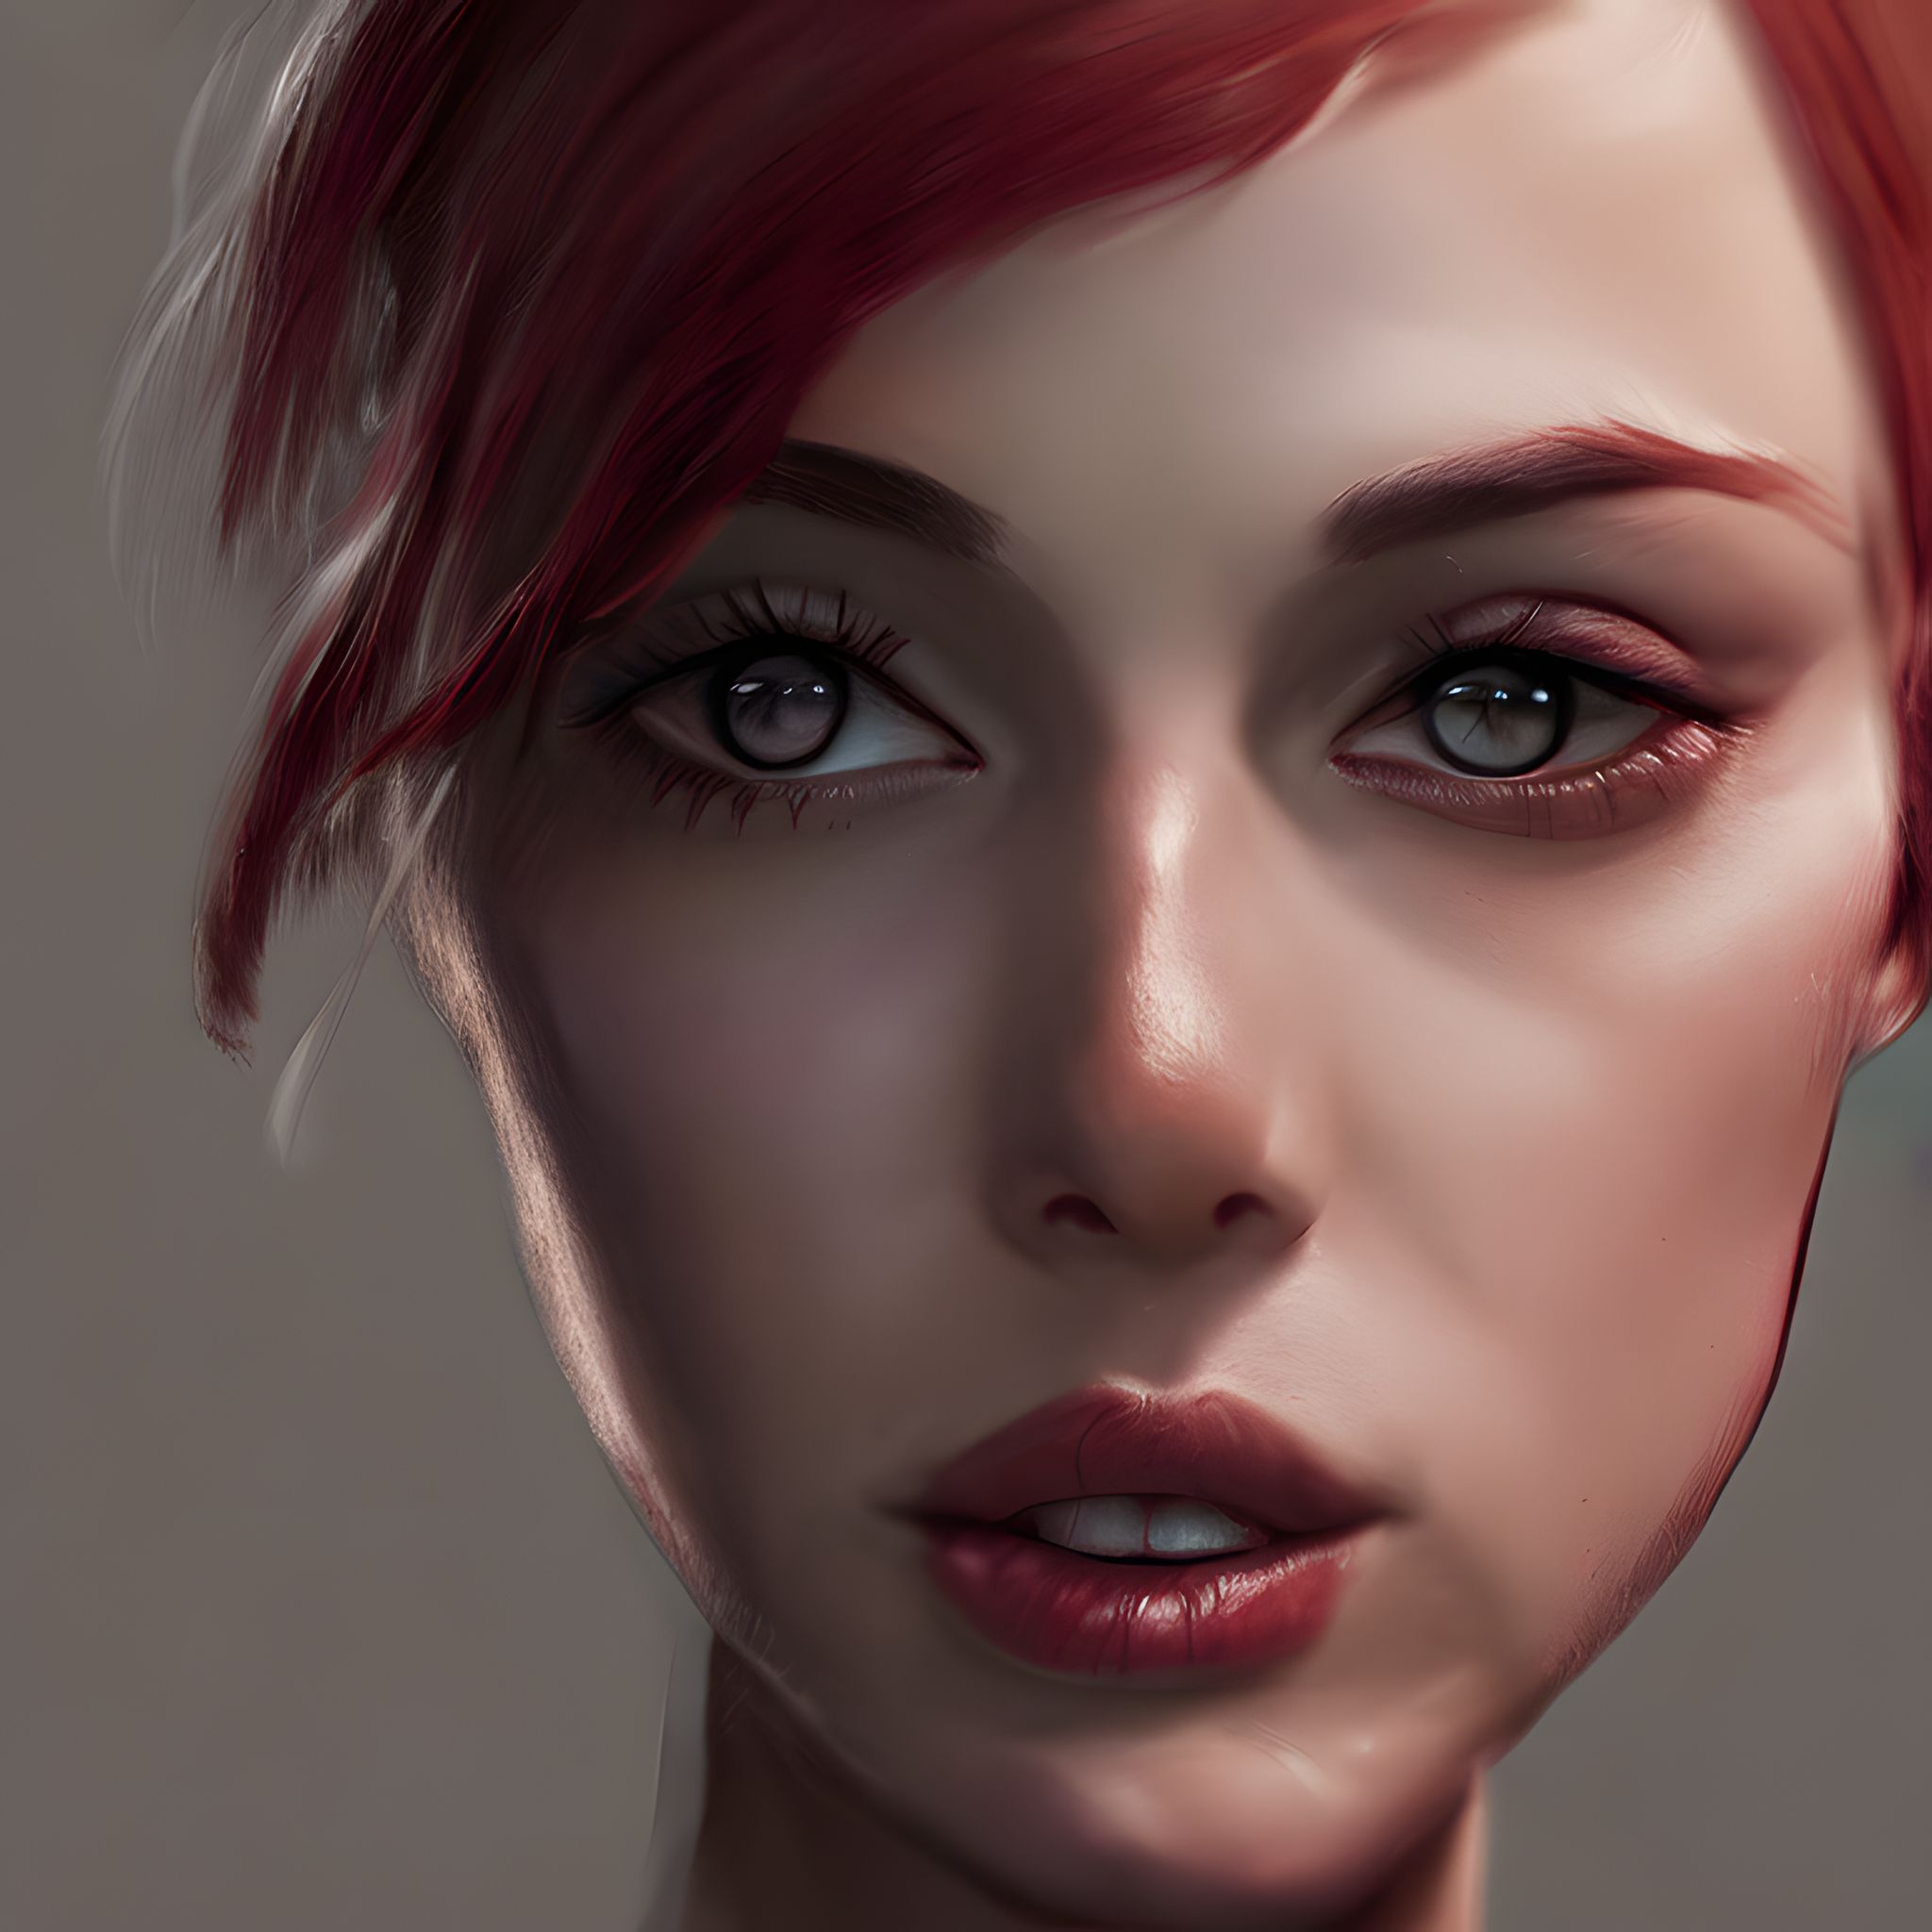 Concept Art Trending: A Professional and Cinematic American Beauty in ...